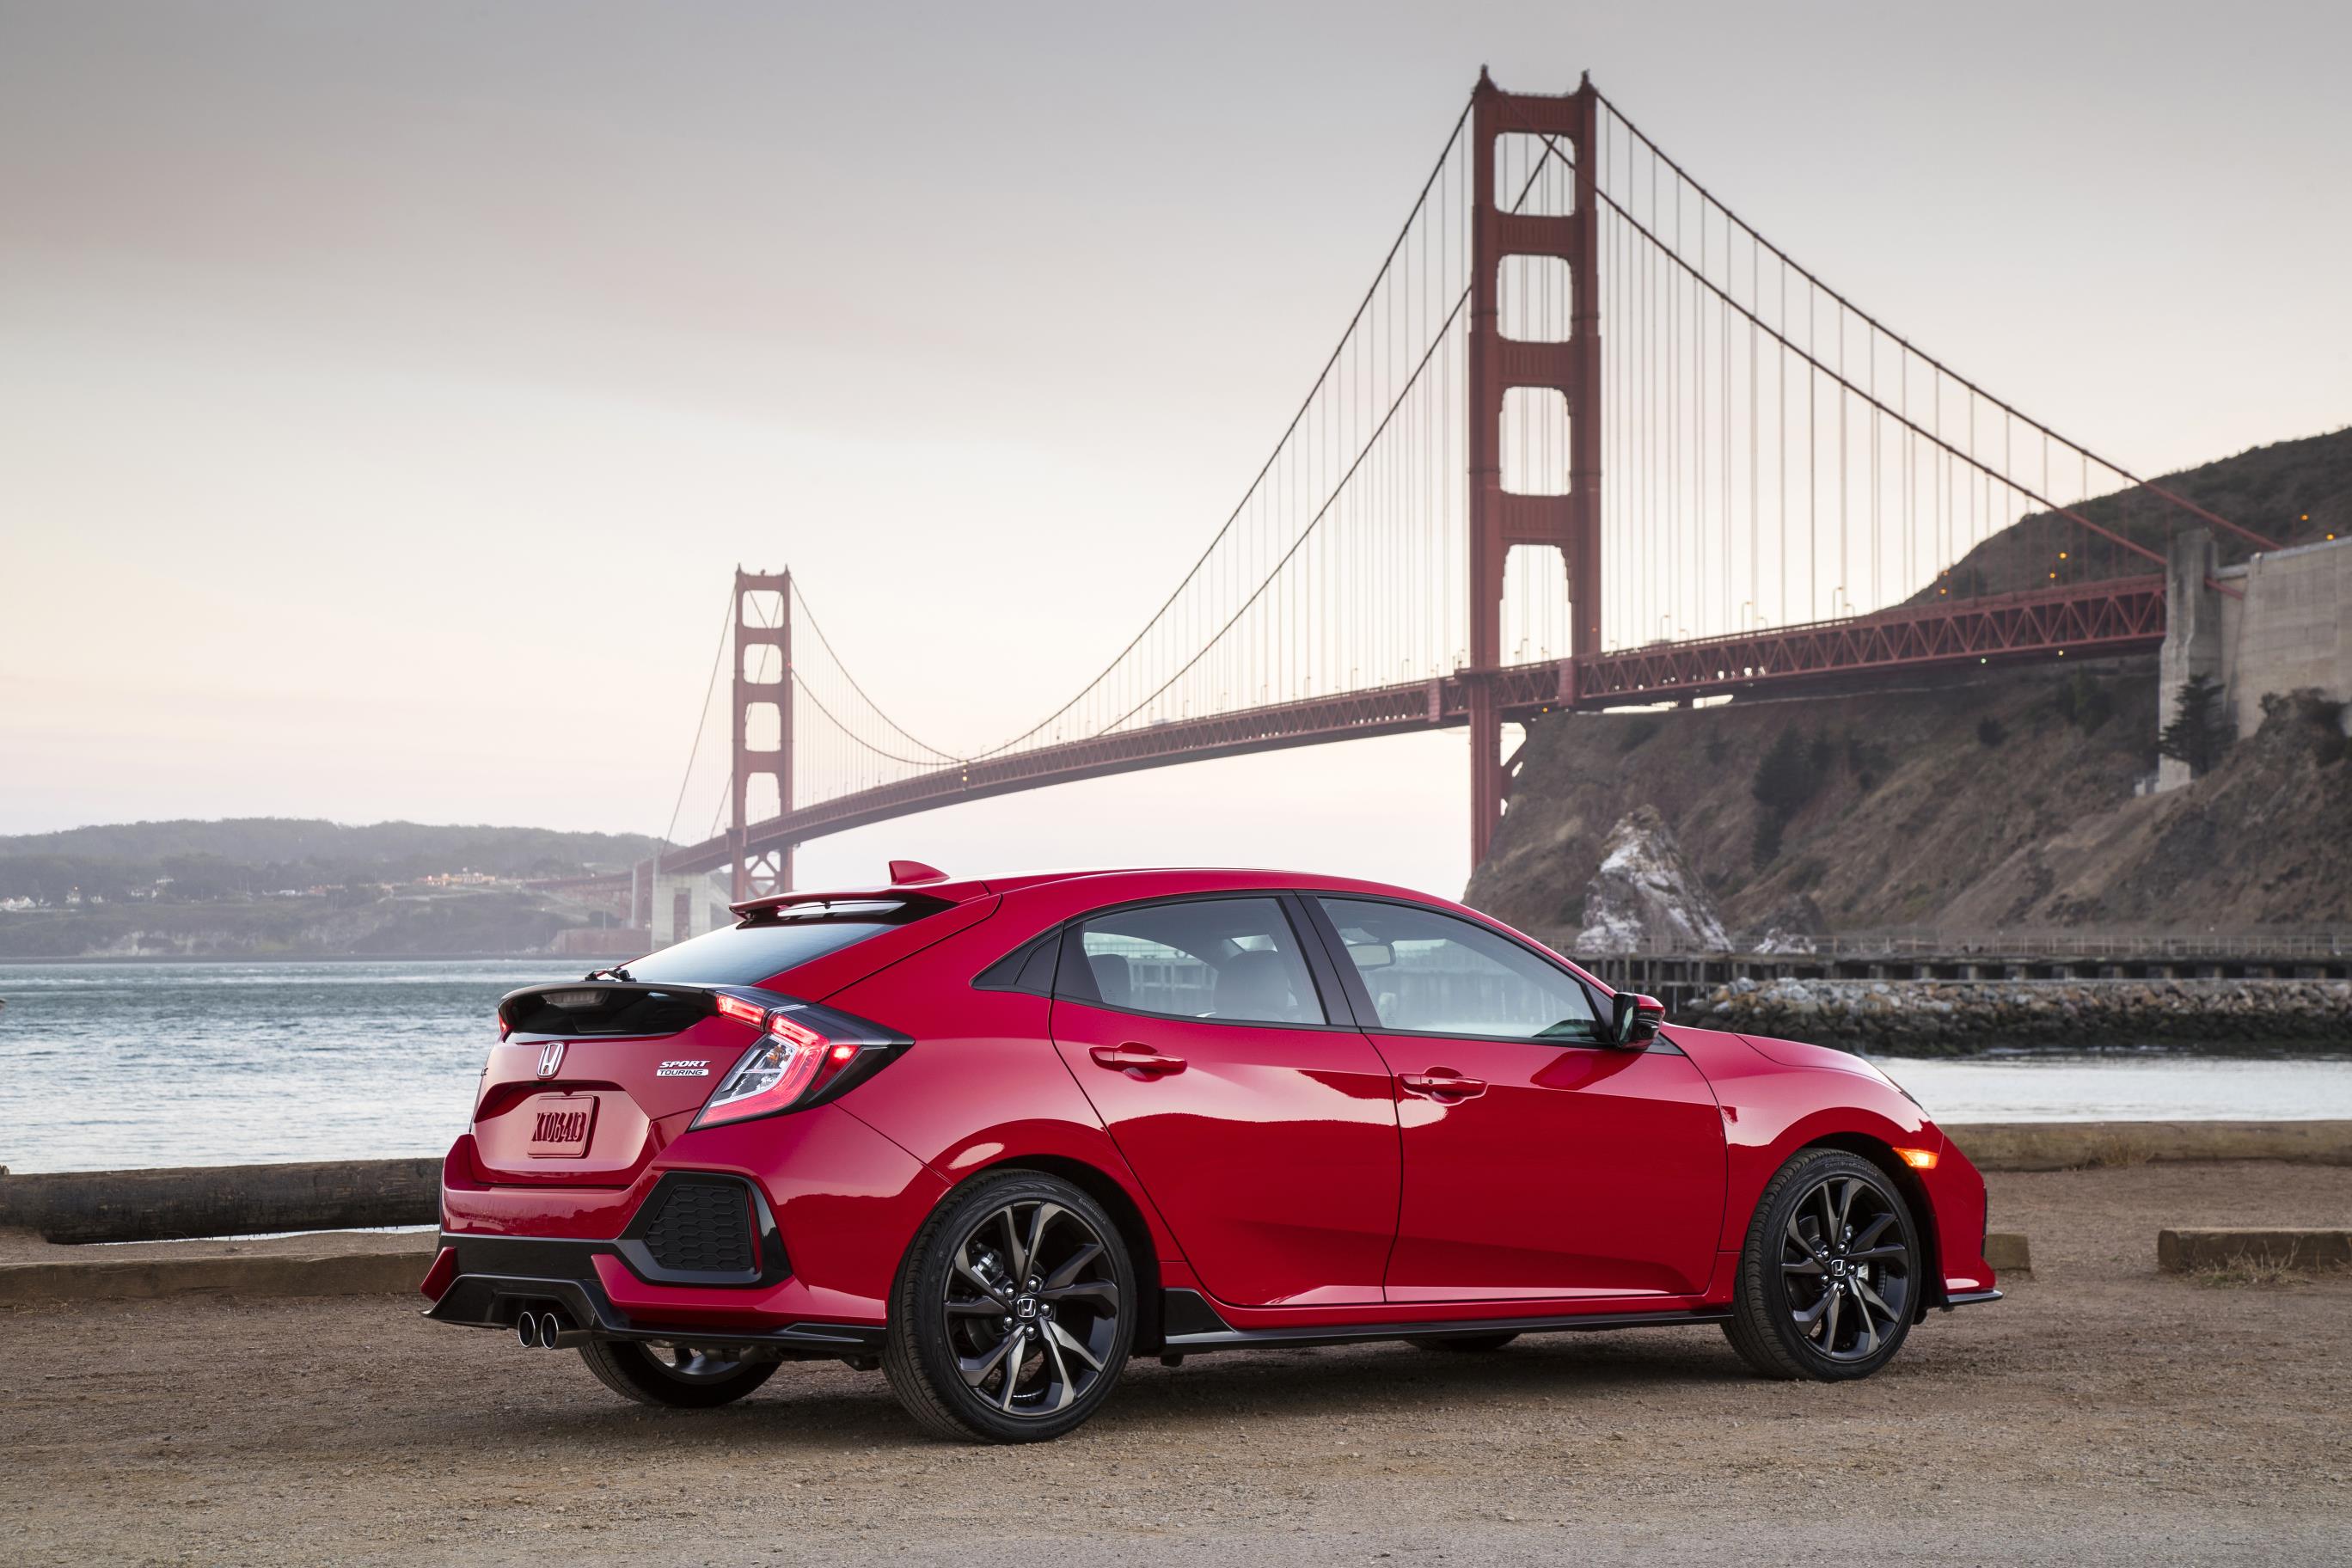 2017 honda civic hatchback arrives in america specs and pricing revealed